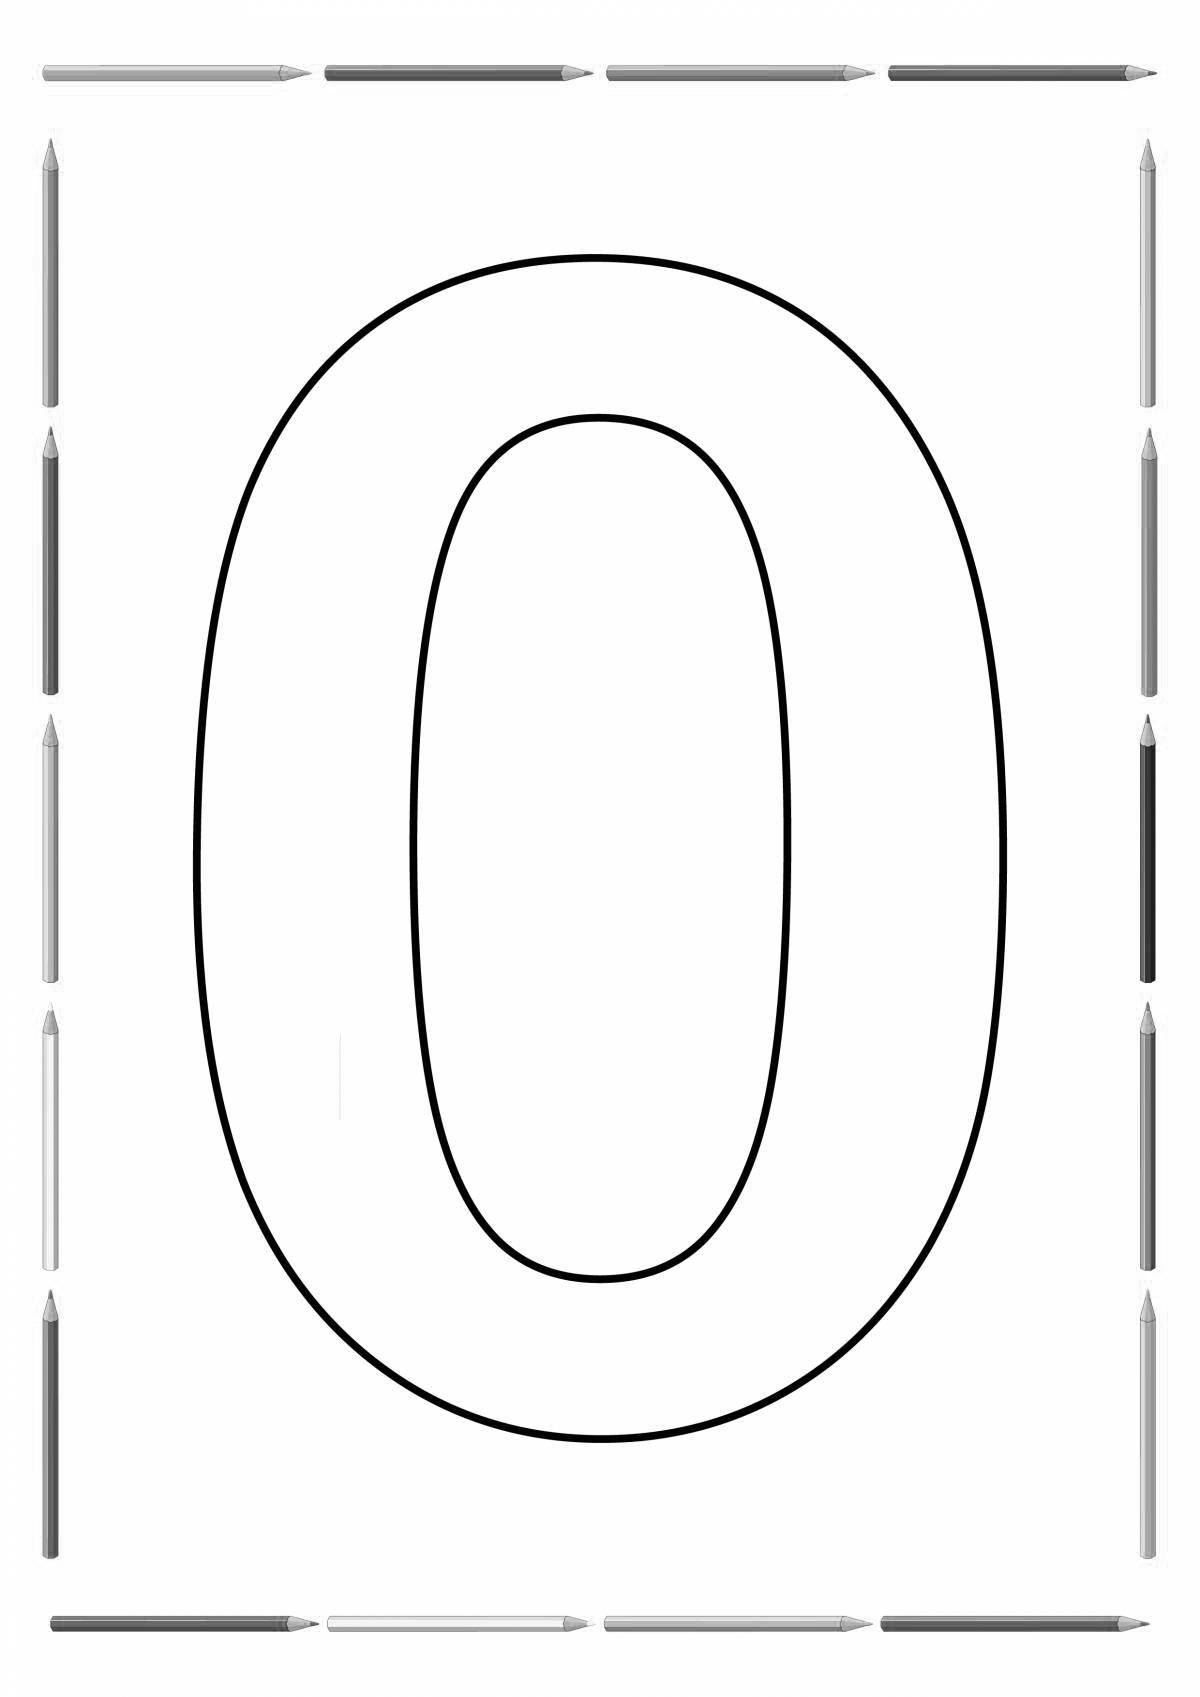 Coloring book awesome number zero